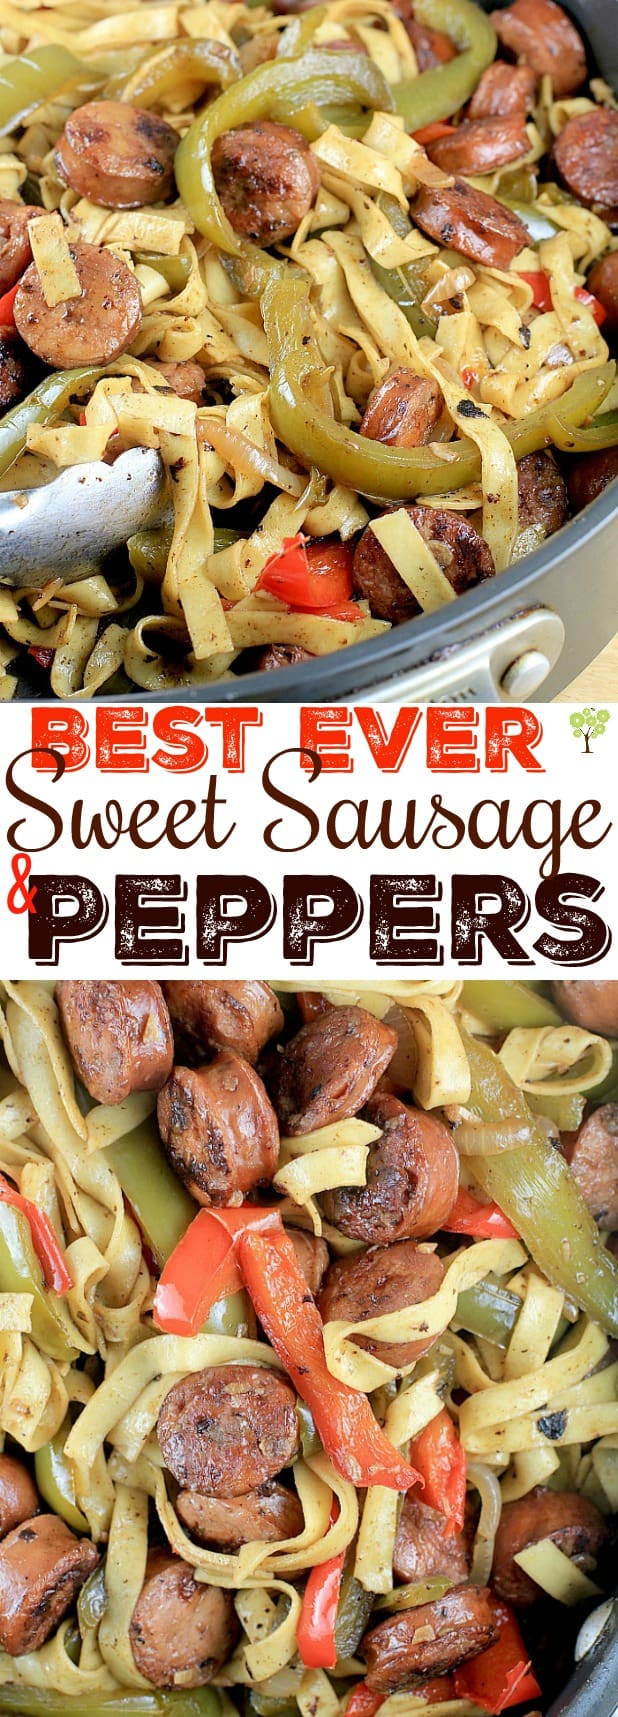 Best Ever Sweet Sausage and Peppers